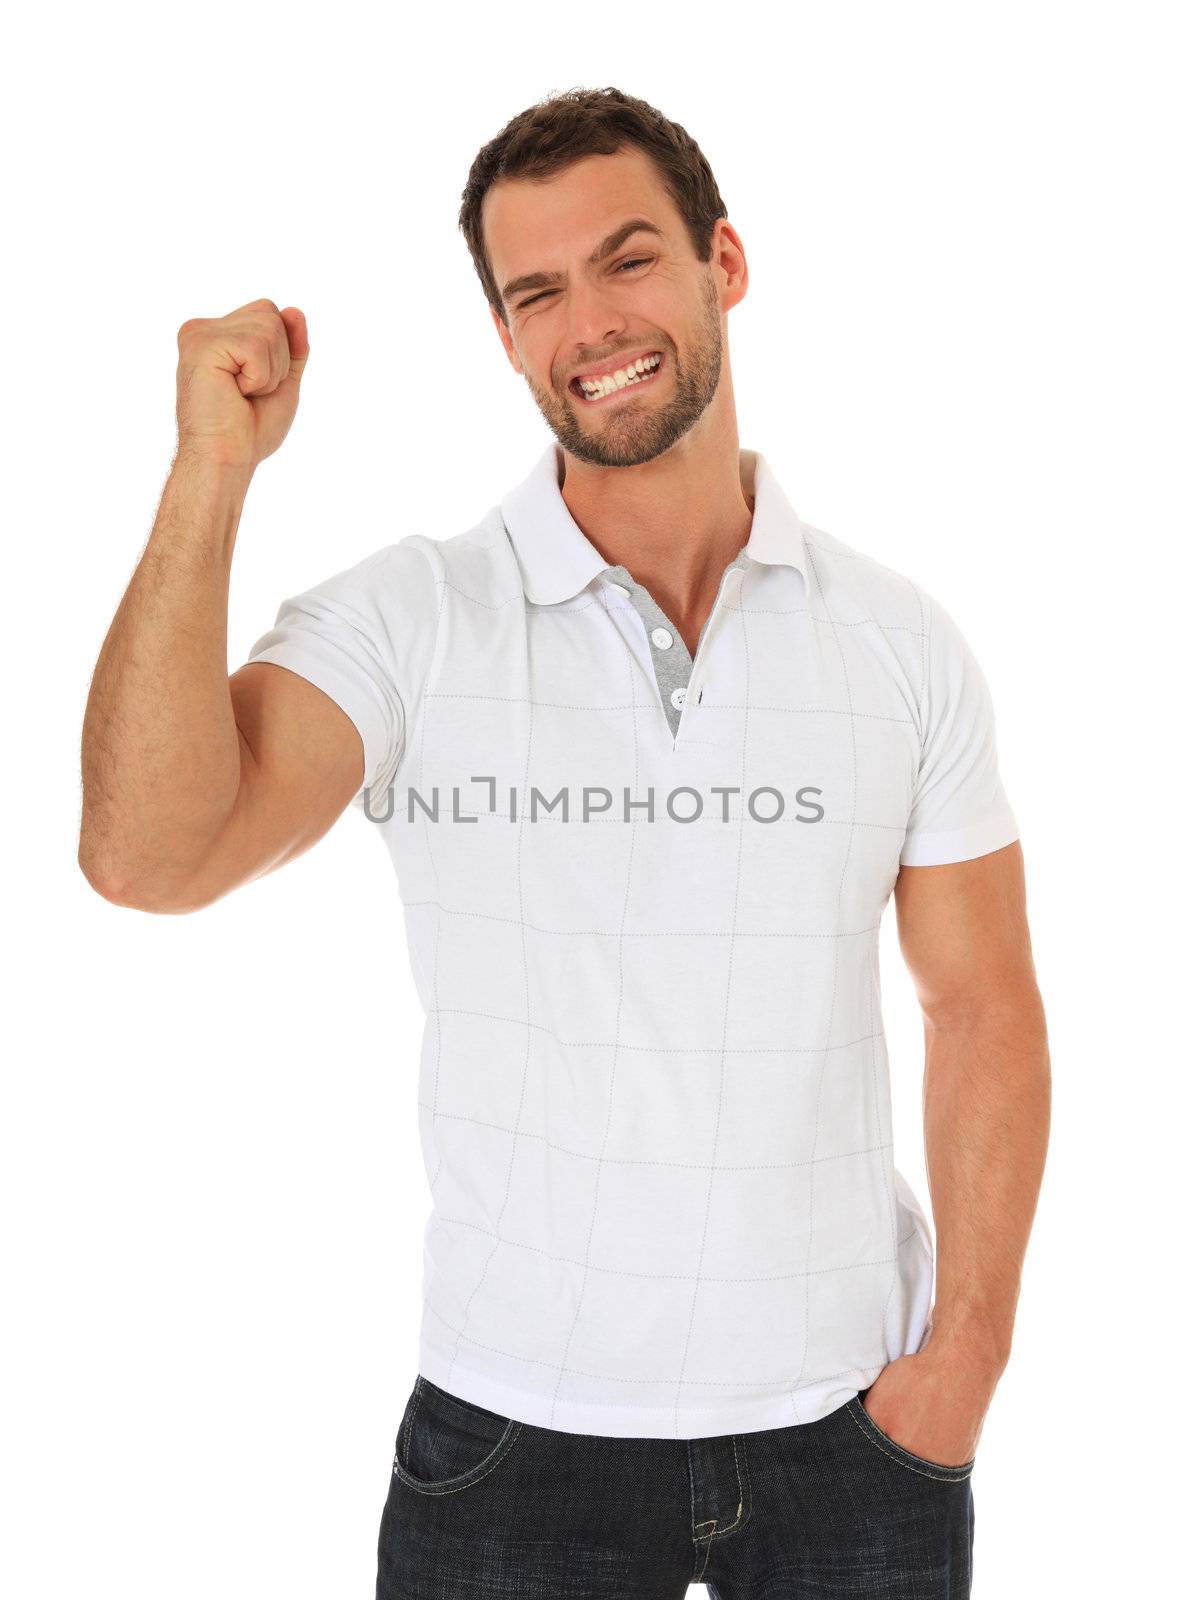 Successful young man. All on white background.